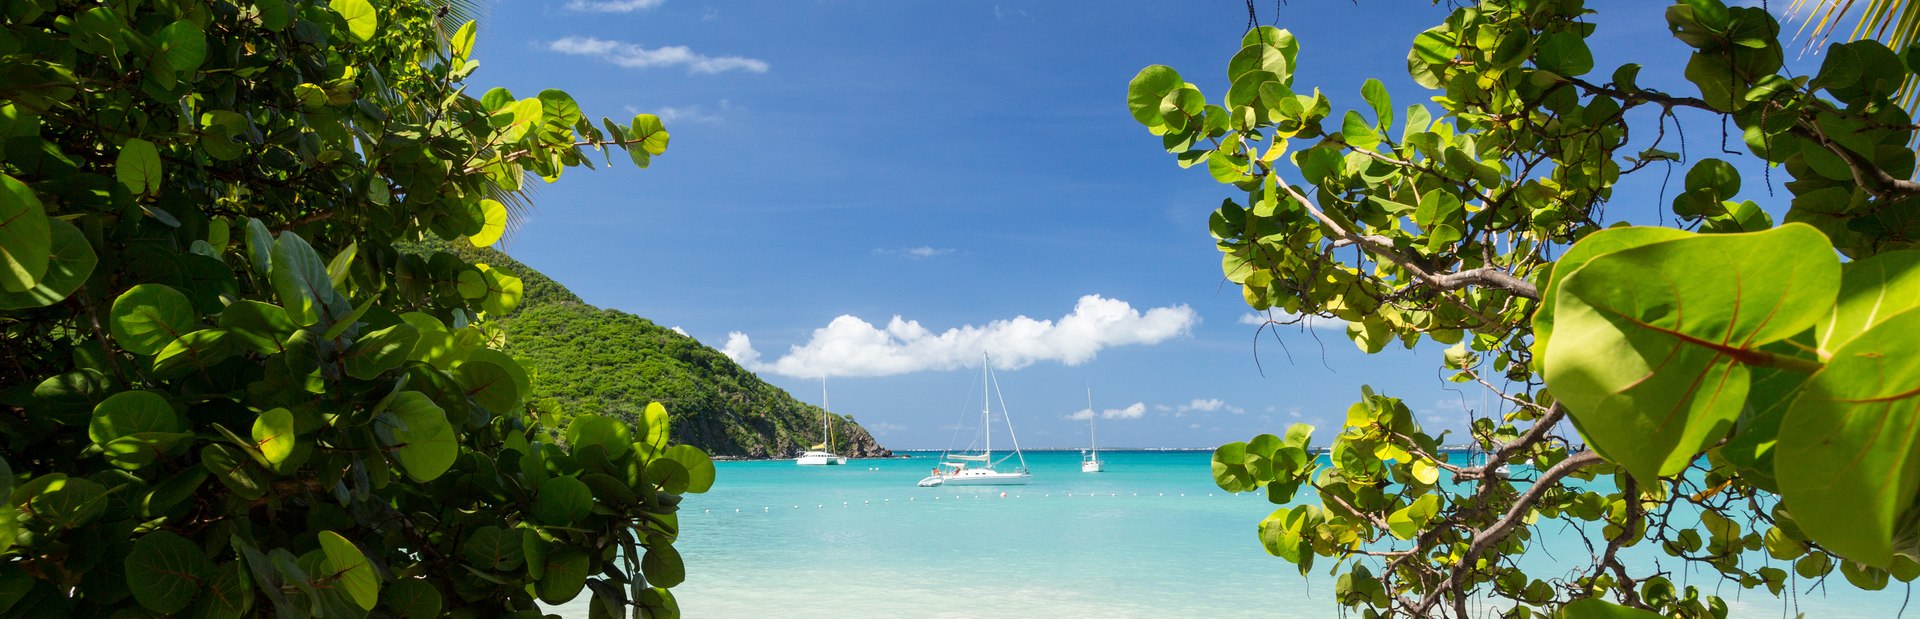 Where can I charter a superyacht in the Caribbean this Winter